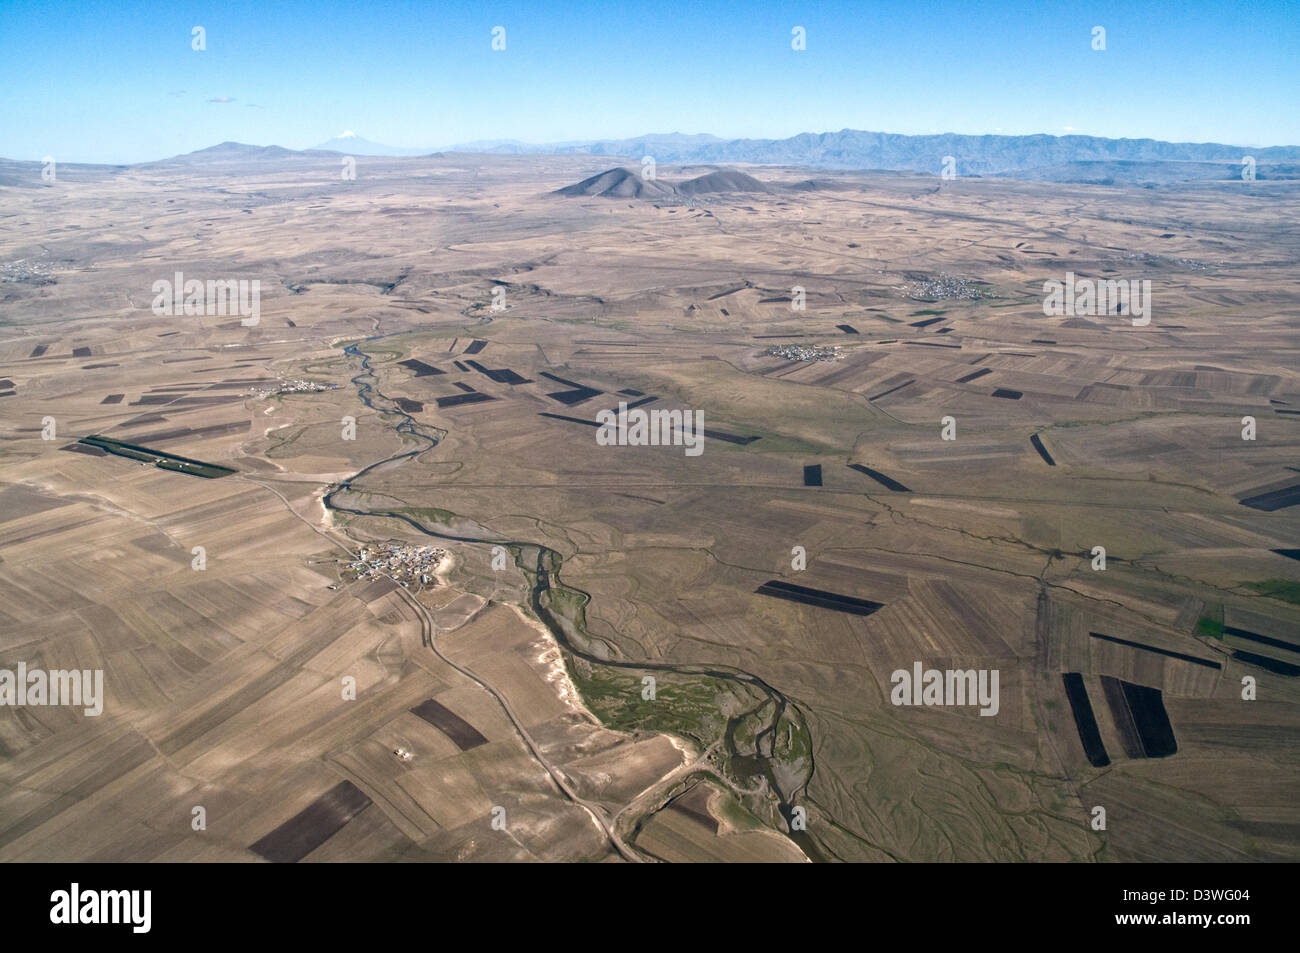 Aerial view of the Turkish steppes near the city of Kars and the Armenia border in the eastern Anatolia region of northeastern Turkey. Stock Photo